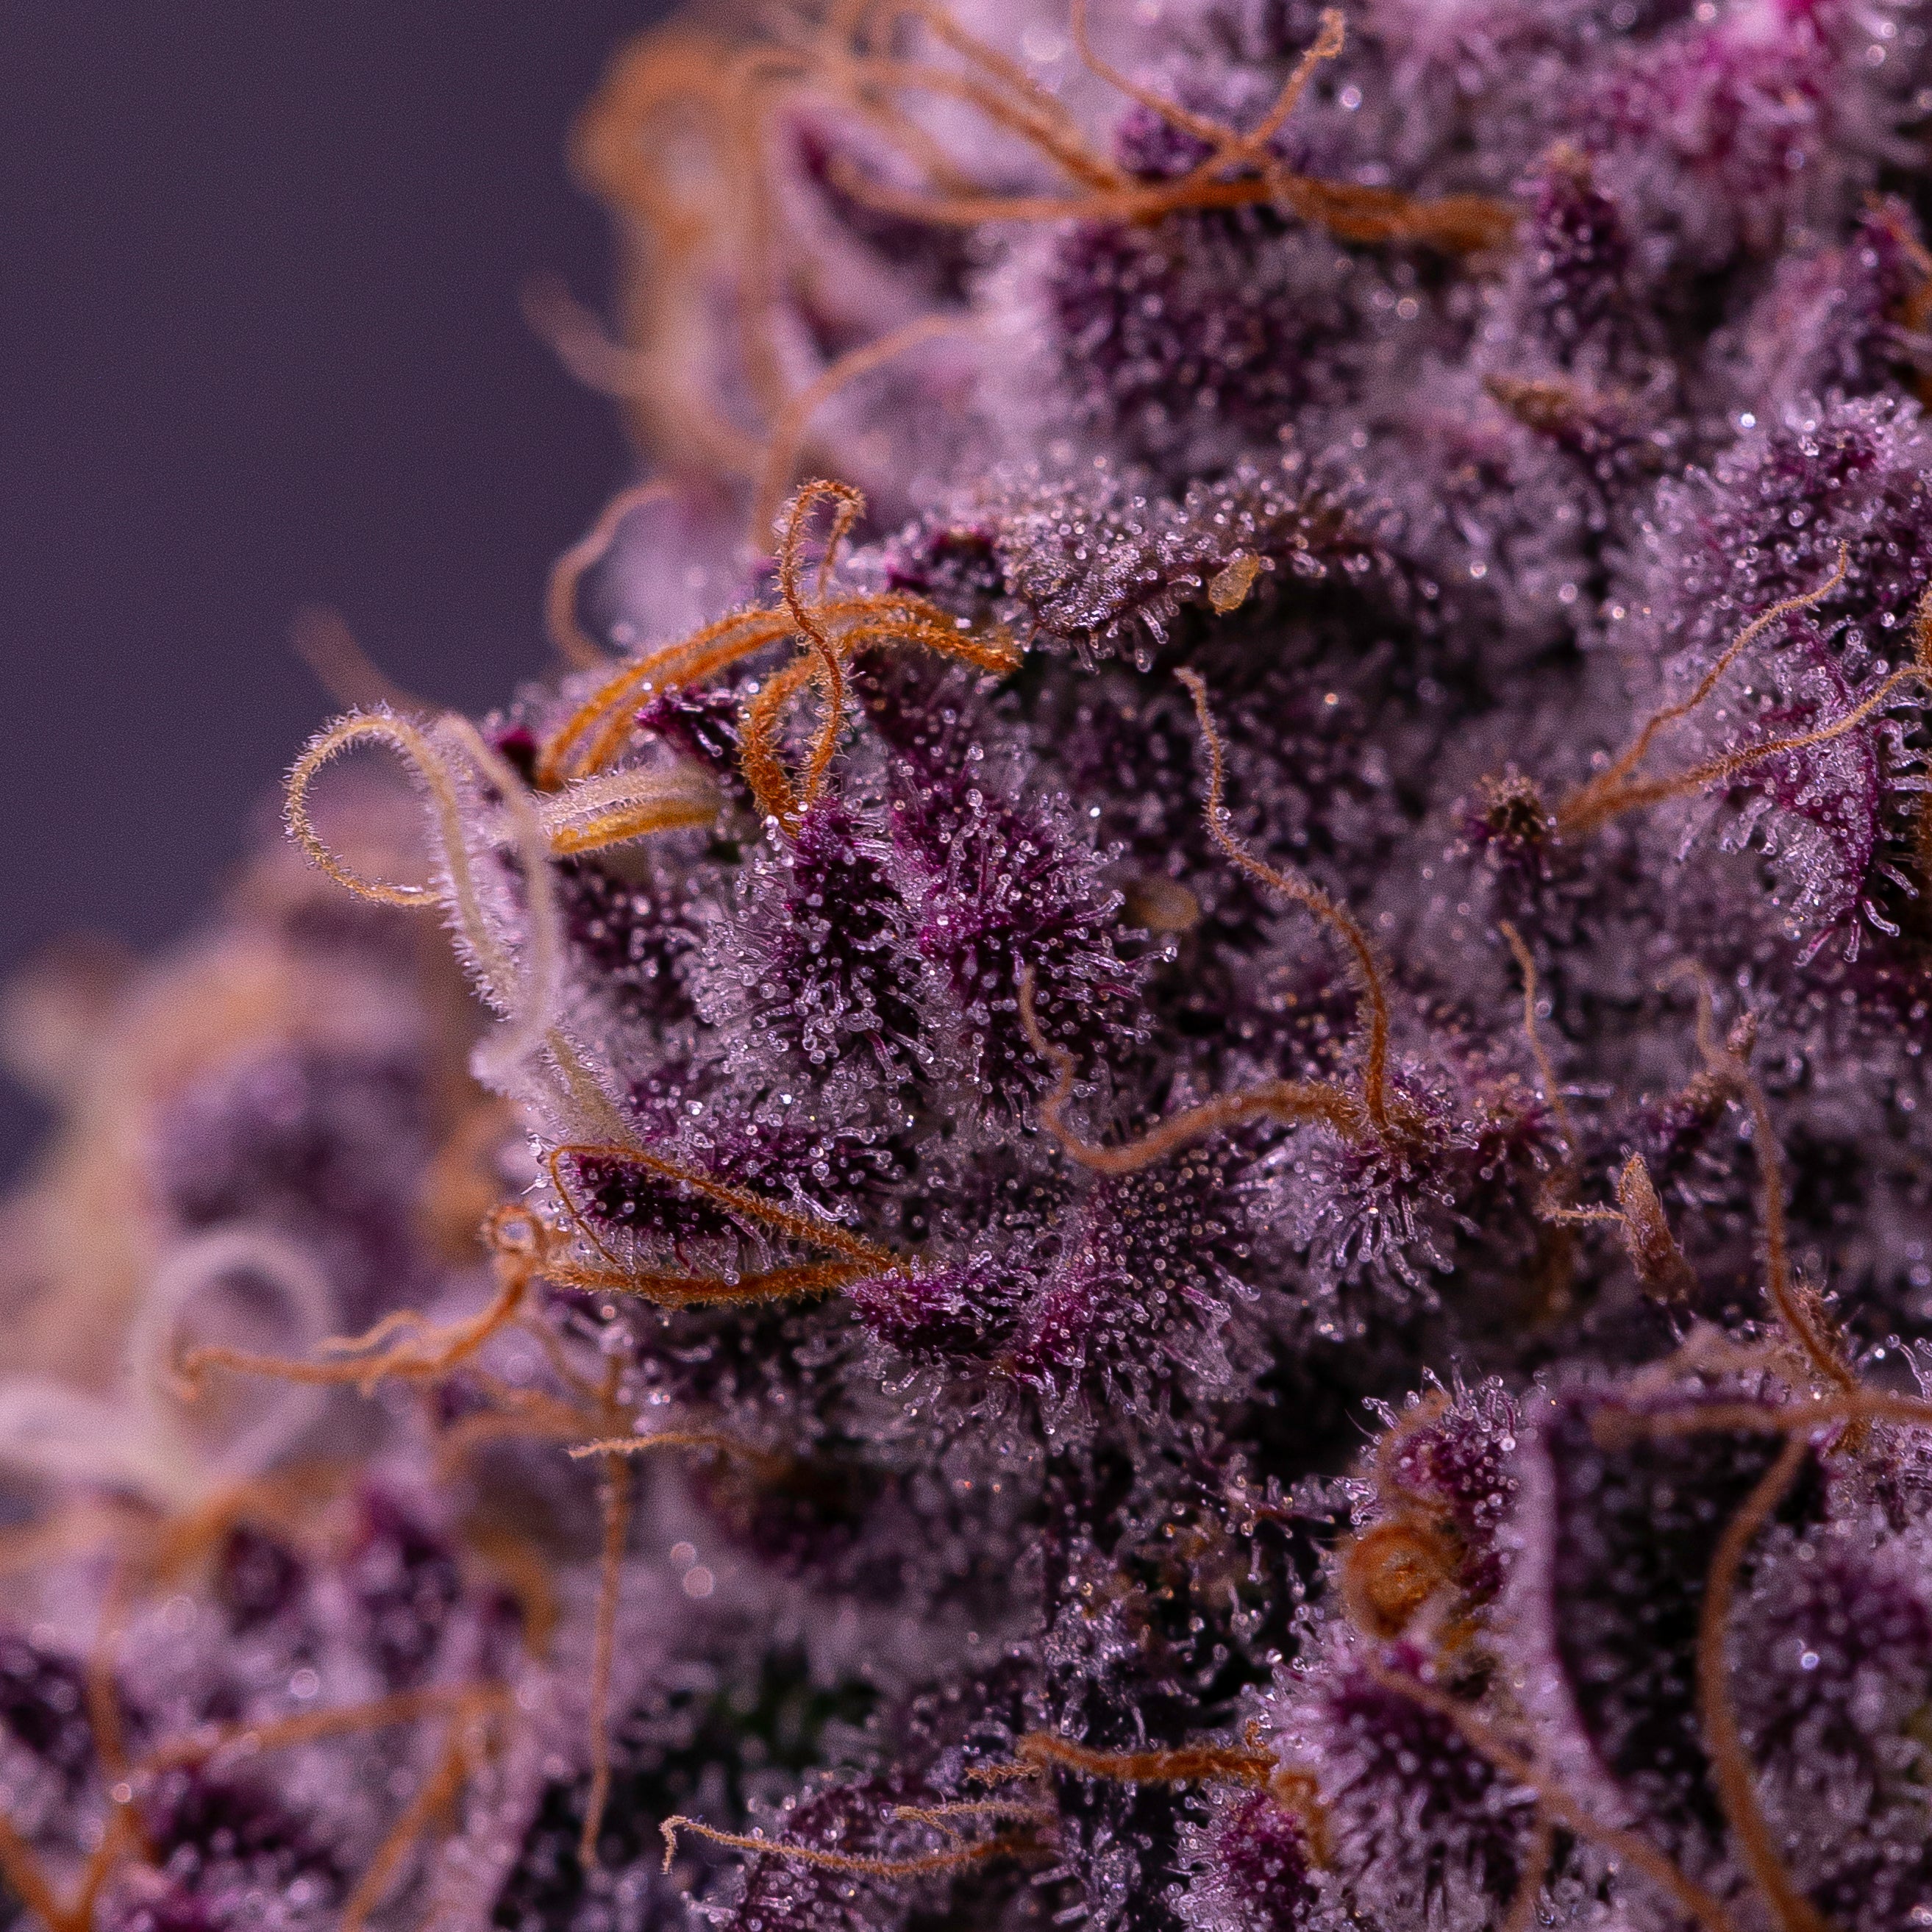 A thick cannabis flower bud glows with a rich purple color and has sparkling white trichomes.